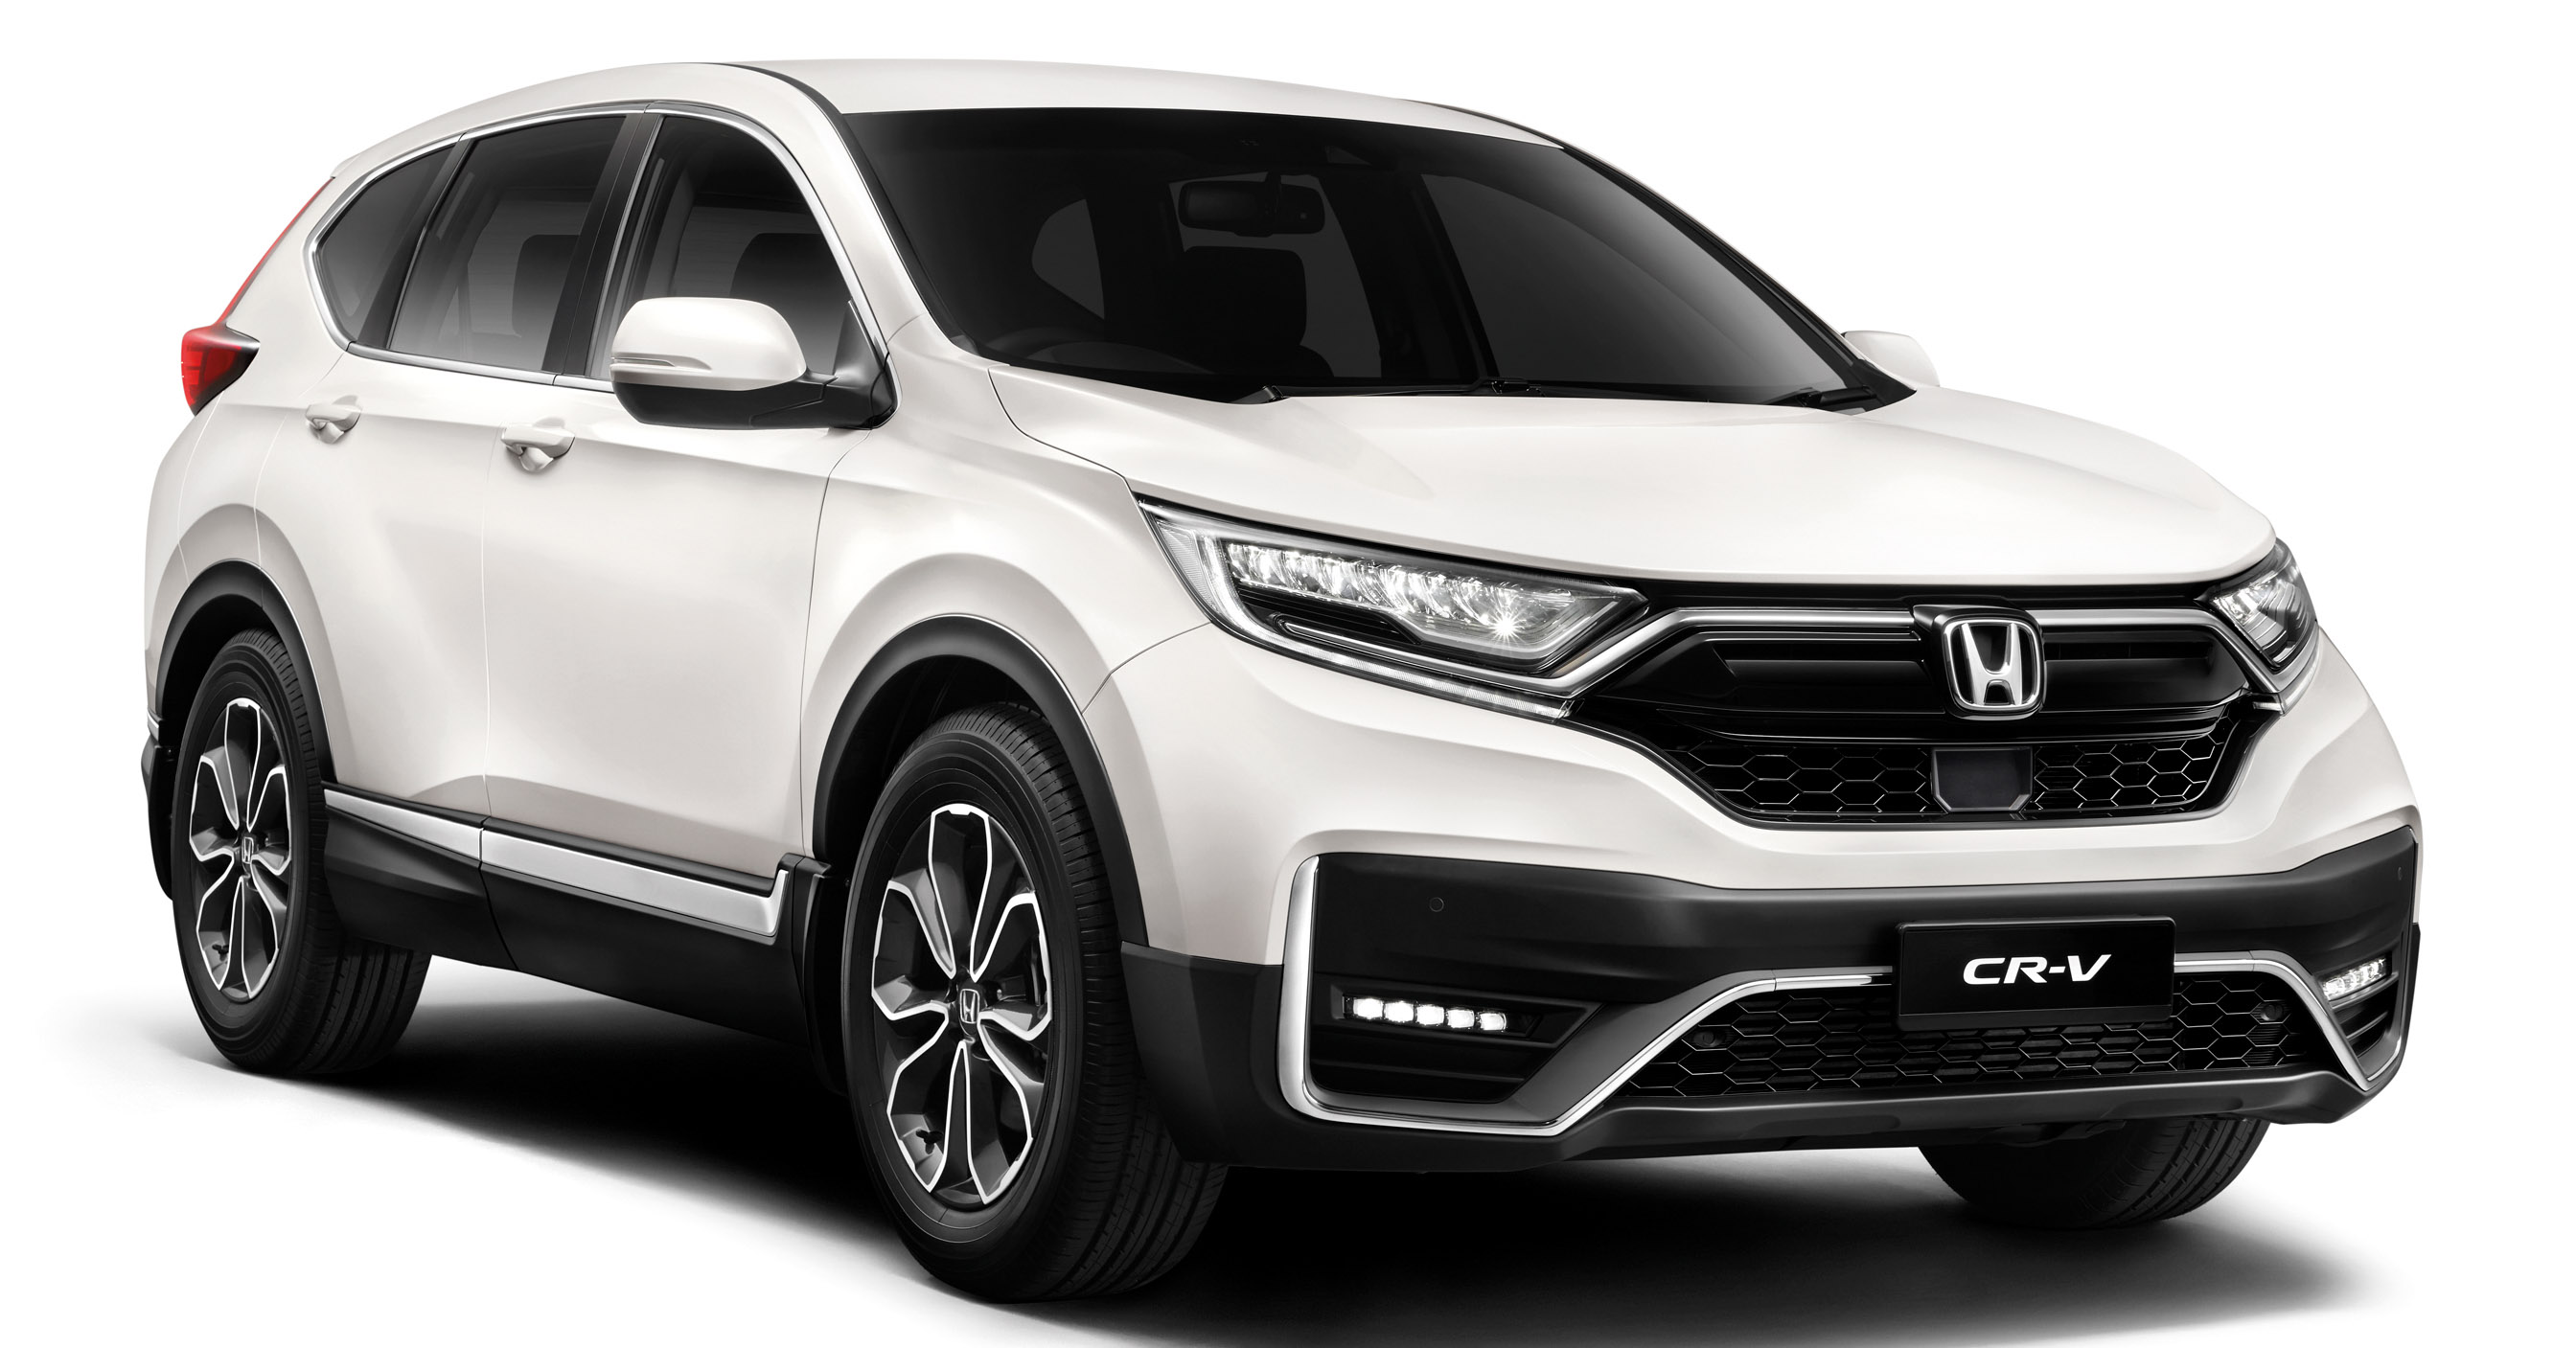 2020 Honda Cr V Facelift Launched In Malaysia Two 1 5l Turbo One 2 0l Na New Styling Kit From Rm140k Paultan Org